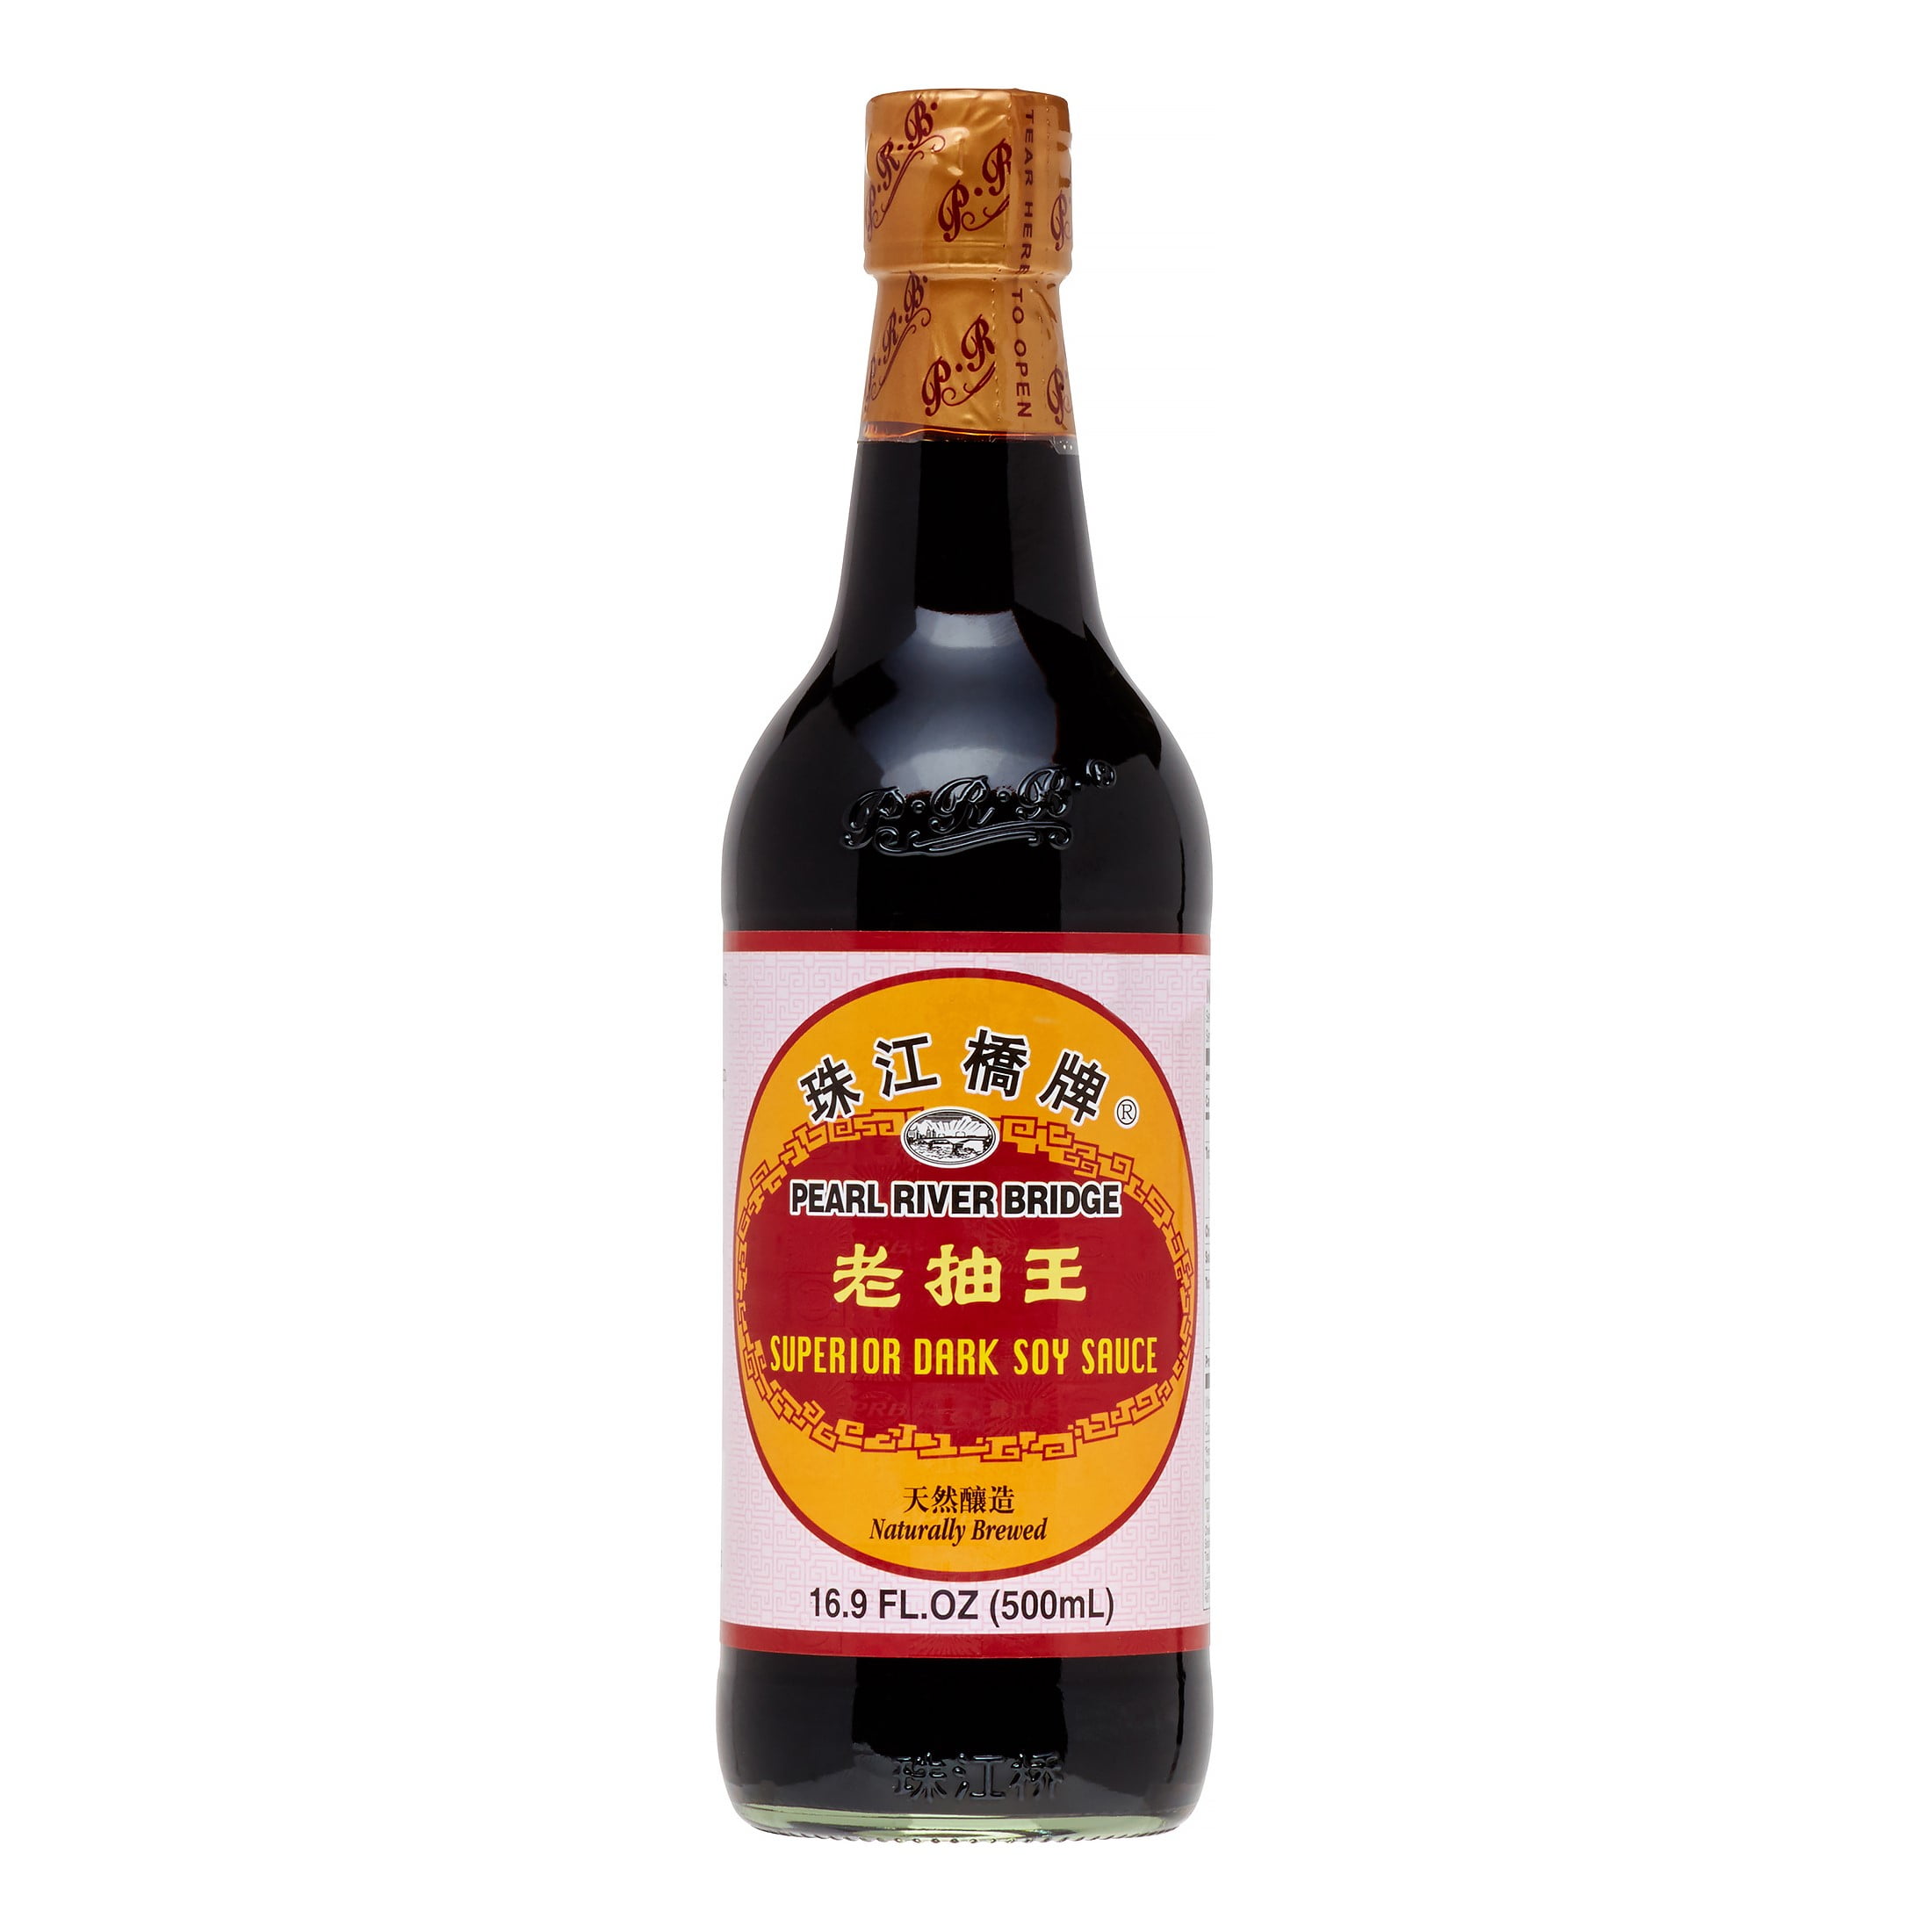 How to find dark soy sauce. 